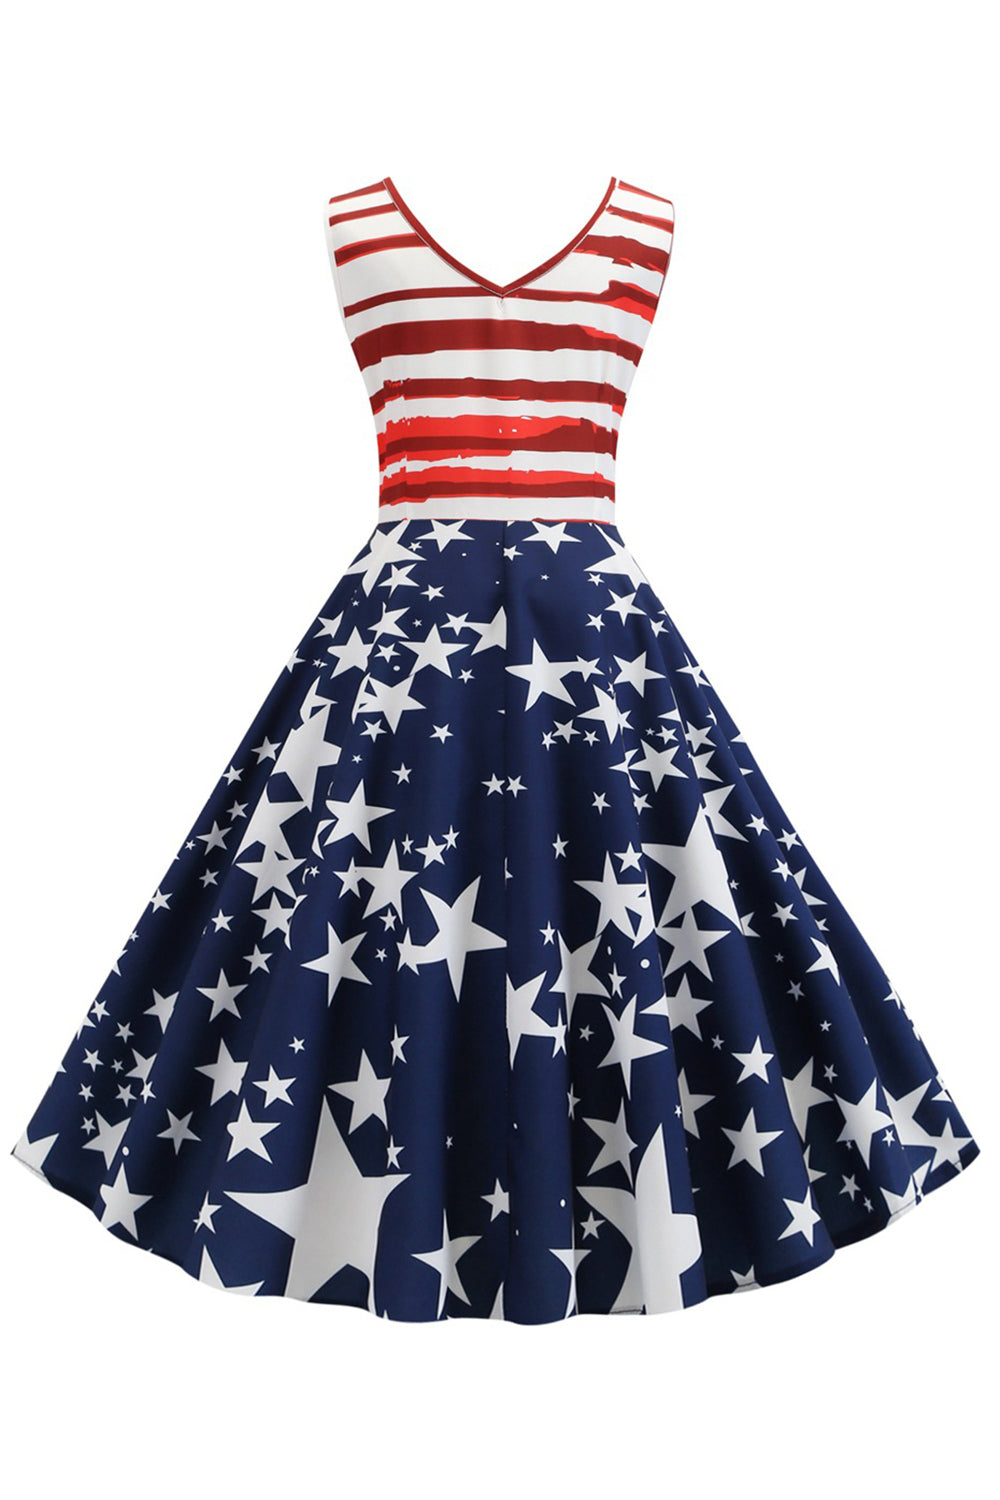 American Independence Day Retro Women's Dress